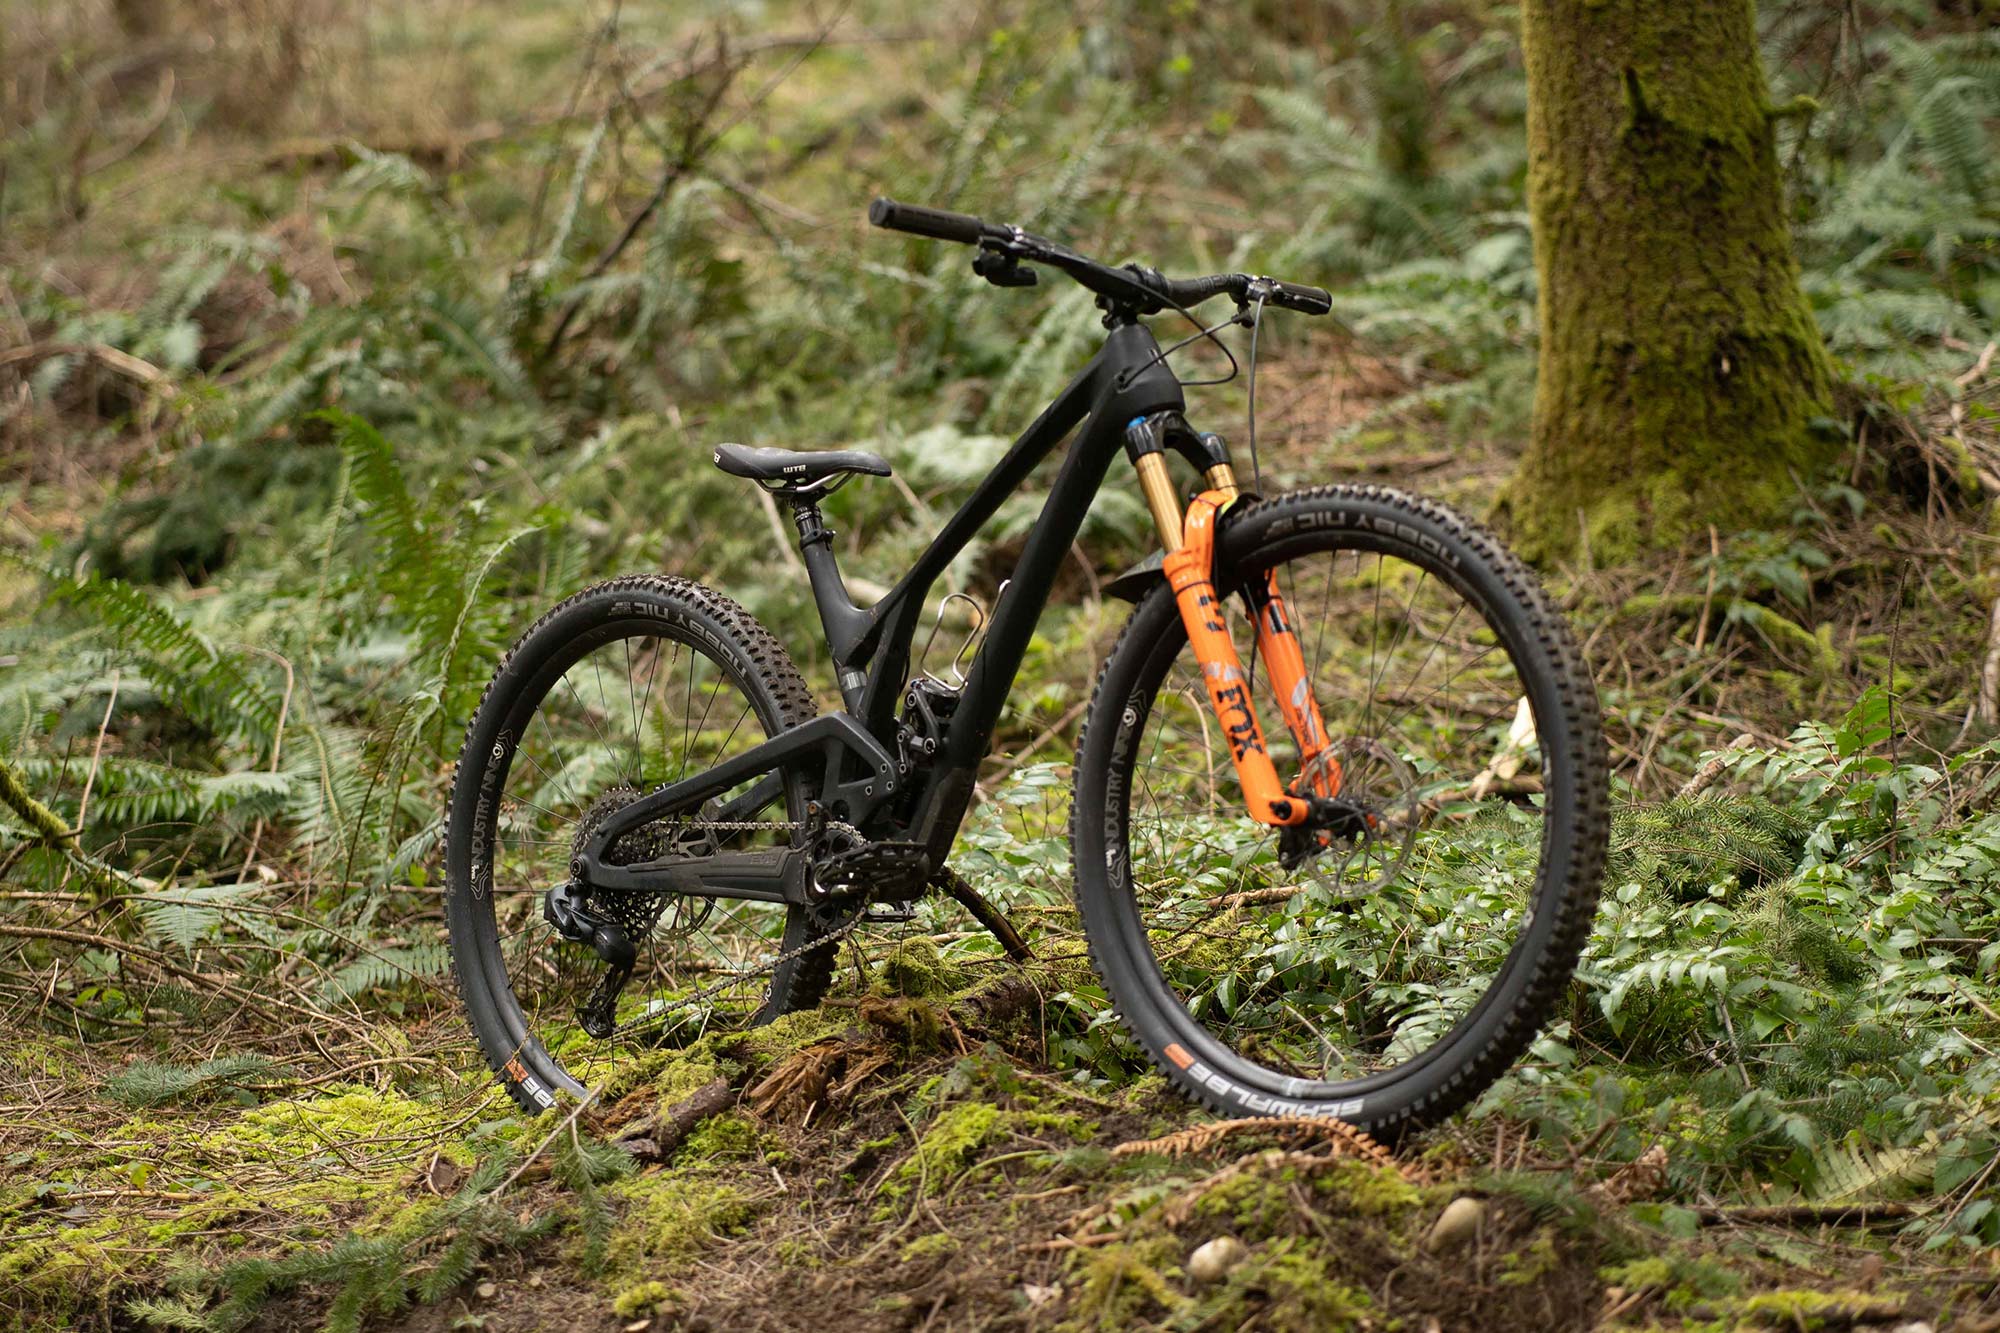 The Evil Following is an incredibly capable mountain bike